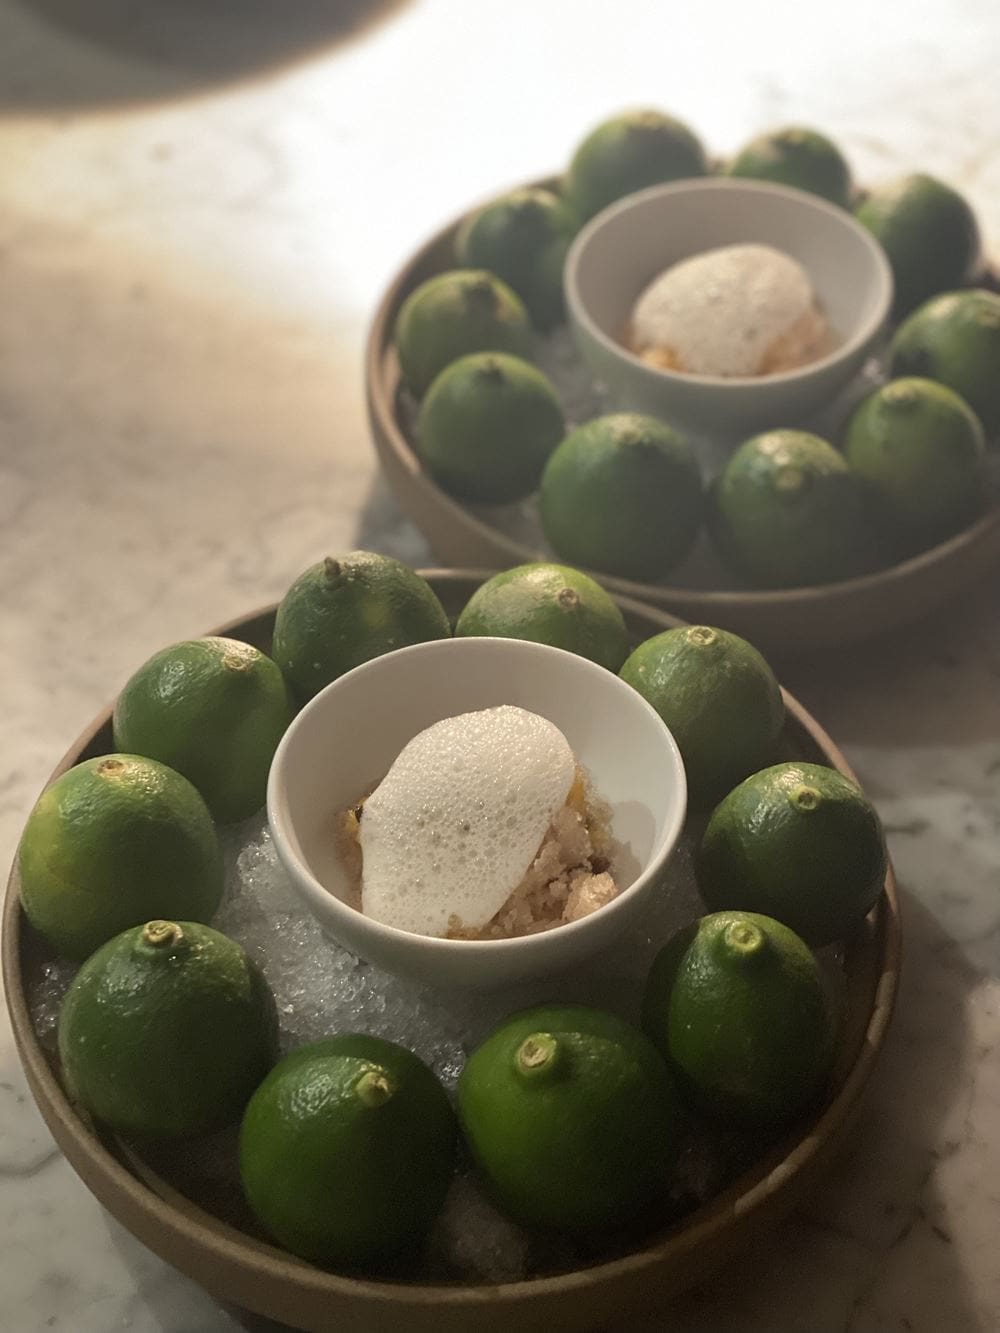 Asia reopening | Two bowls of limes on ice at the Kata Food Festival in Malaysia